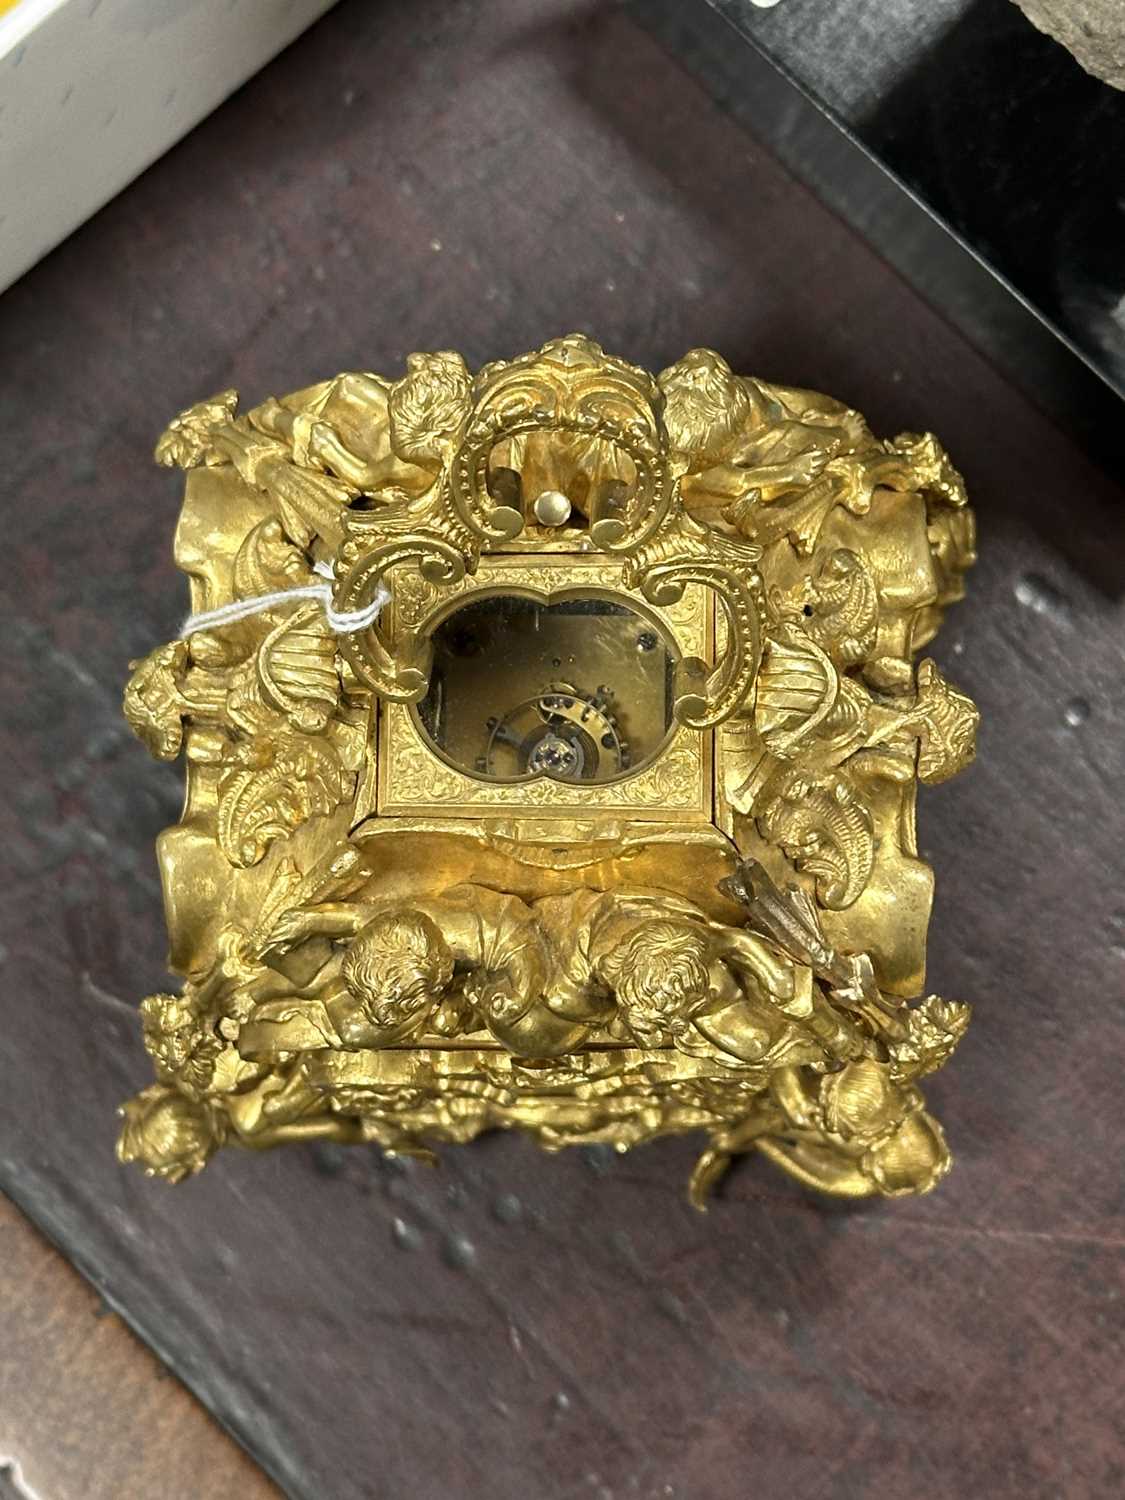 GROHE, PARIS. A FINE AND RARE MID 19TH CENTURY FRENCH CAST GILT BRASS ROCOCO REPEATING PETITE SONNER - Image 14 of 17